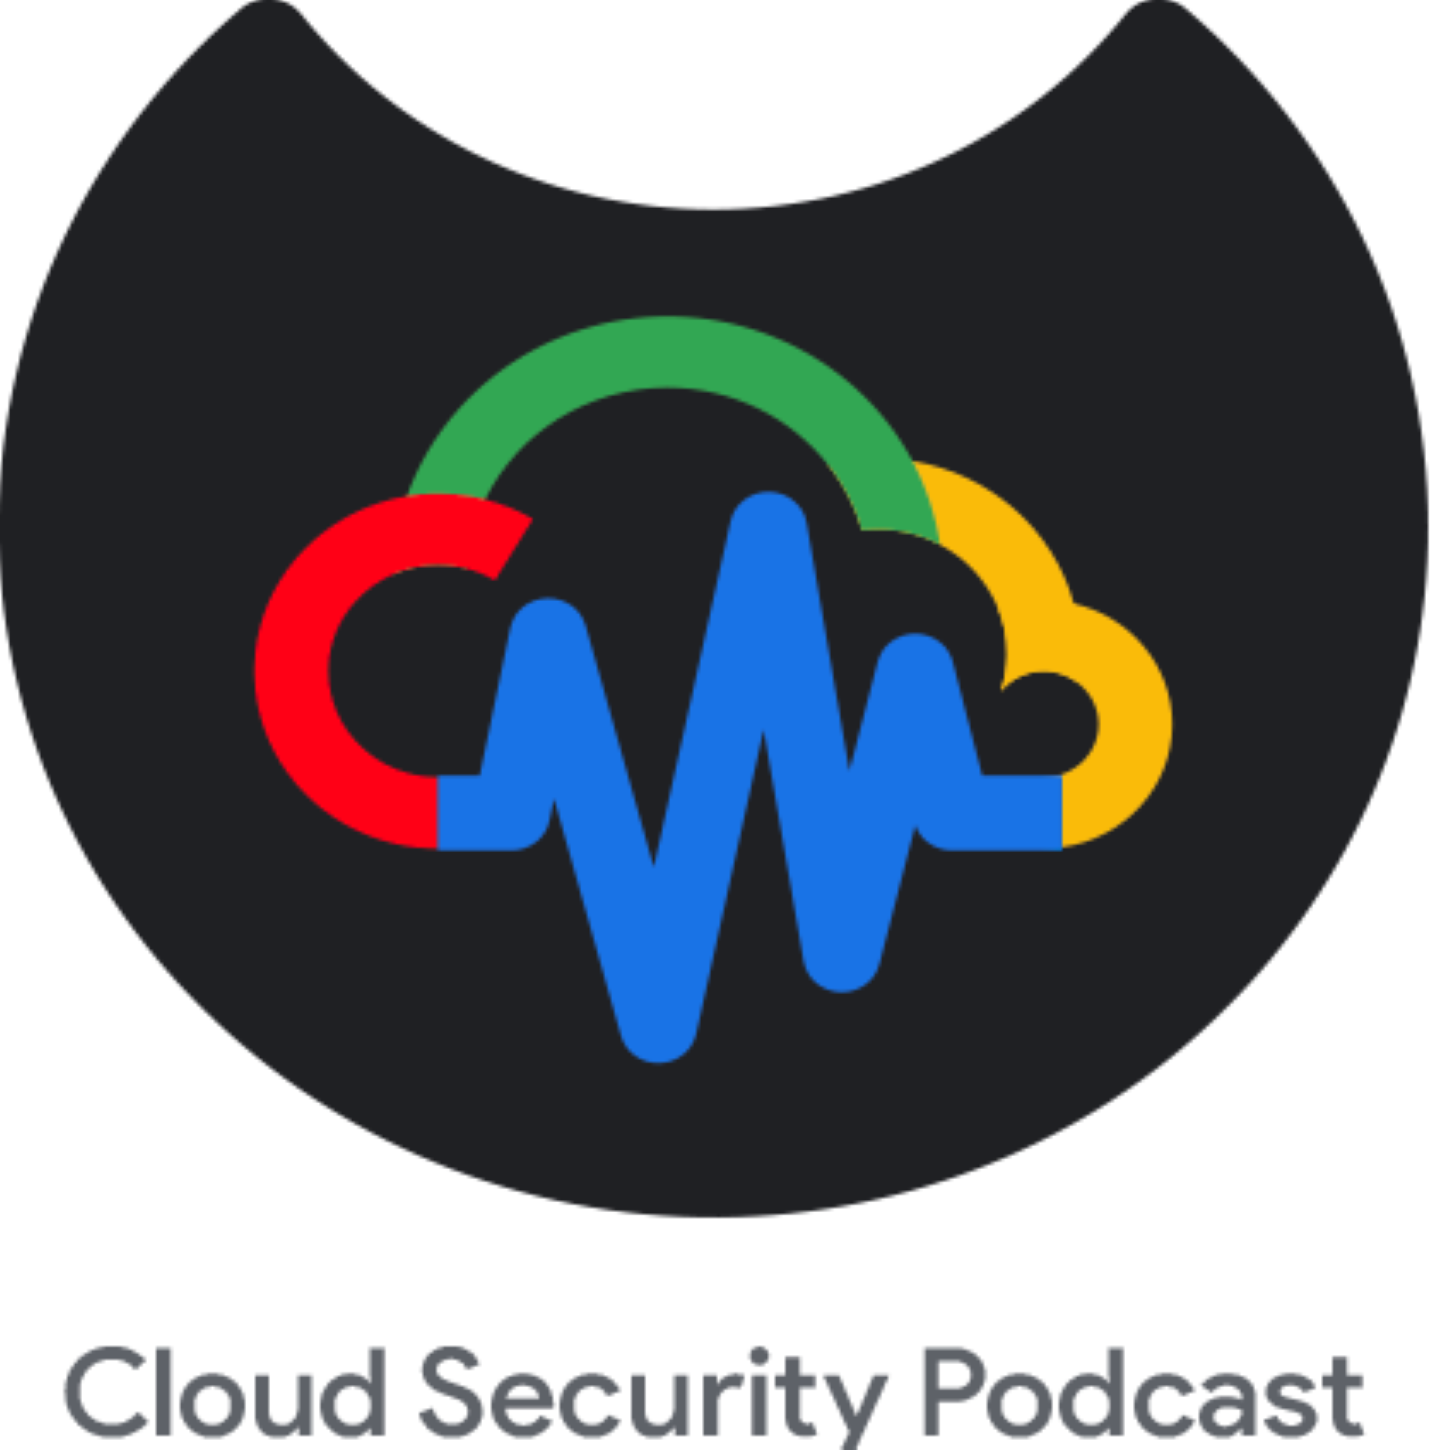 A highlight from EP134  How to Prioritize UX and Security in the Cloud: UX as a Security Capability